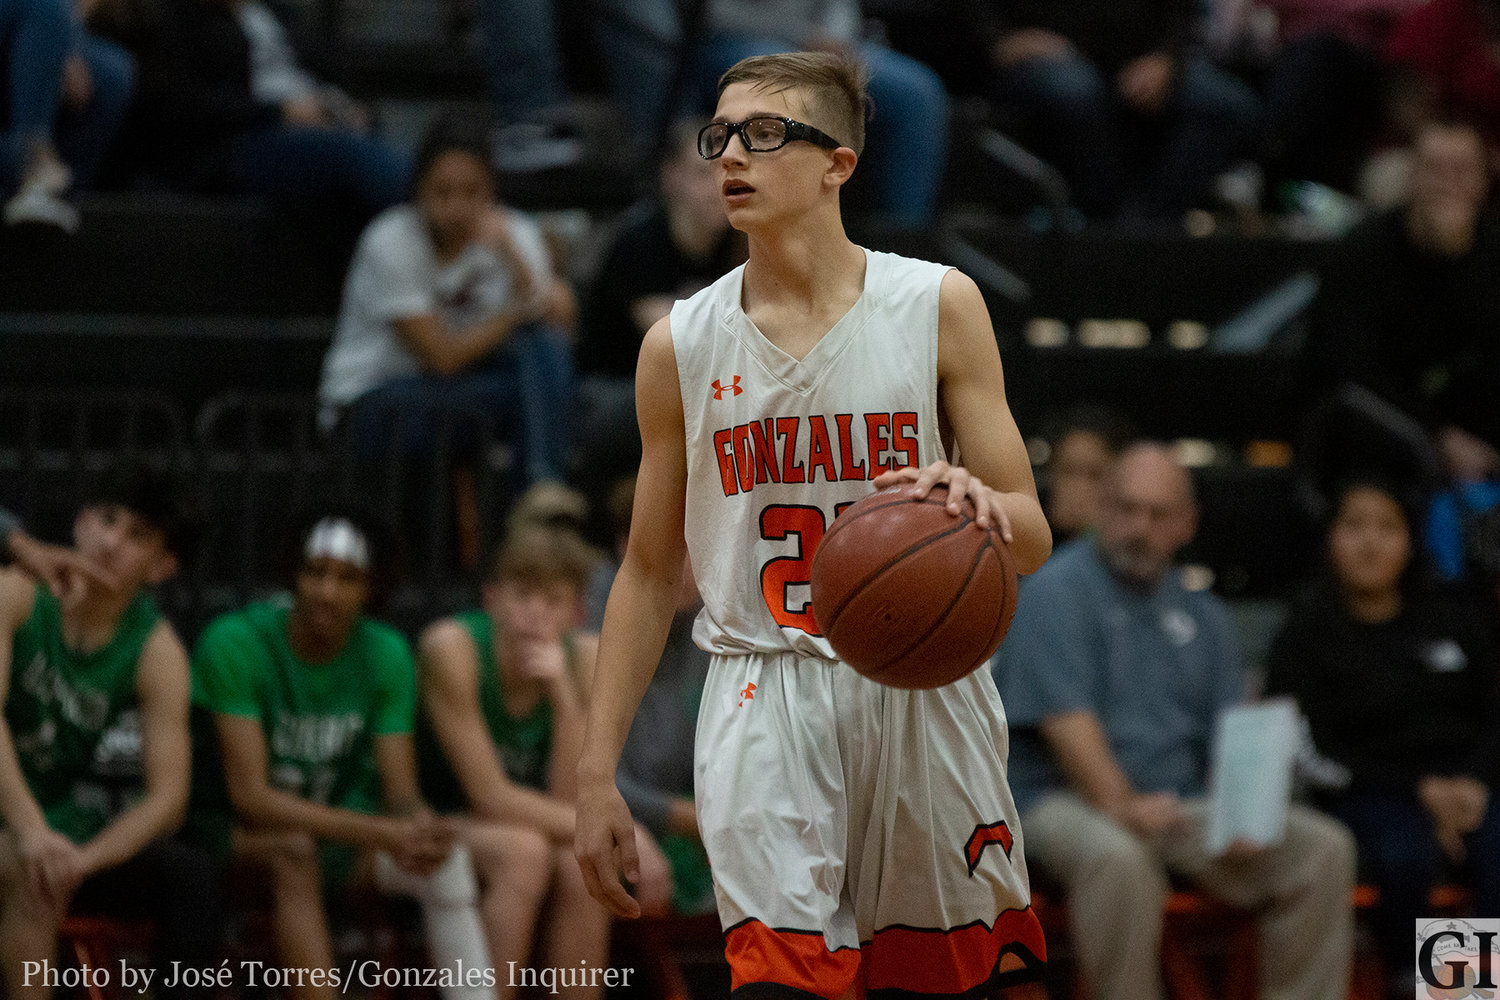 Jaydyn Lookabill (21) played significant minutes in Gonzales’ 48-43 loss against Cuero on Tuesday.